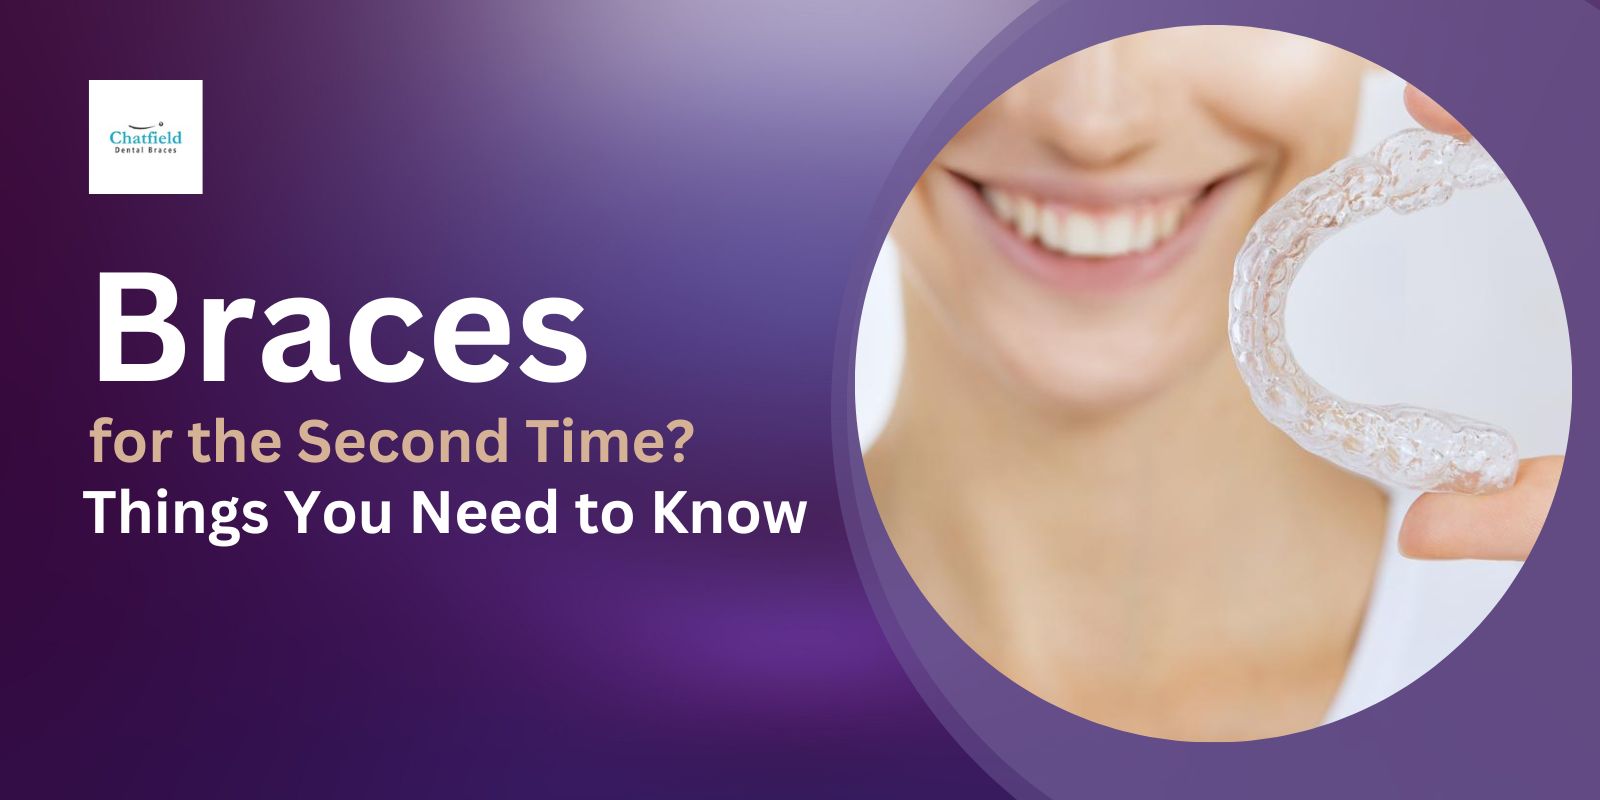 Braces for the Second Time? Things You Need to Know